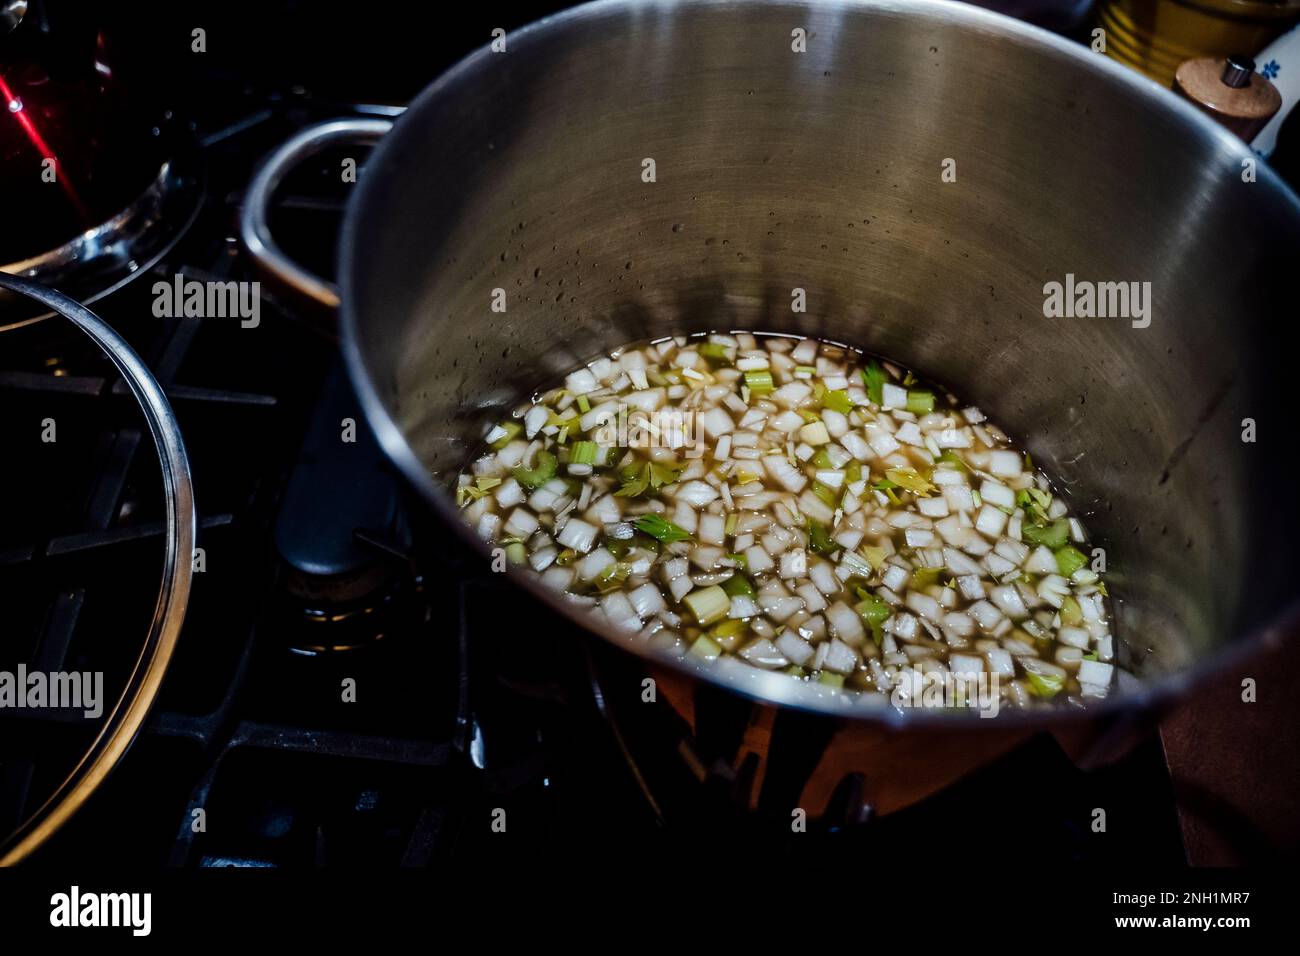 View from Above of Large Soup Pot Warming Onions, Celery and Broth Stock Photo